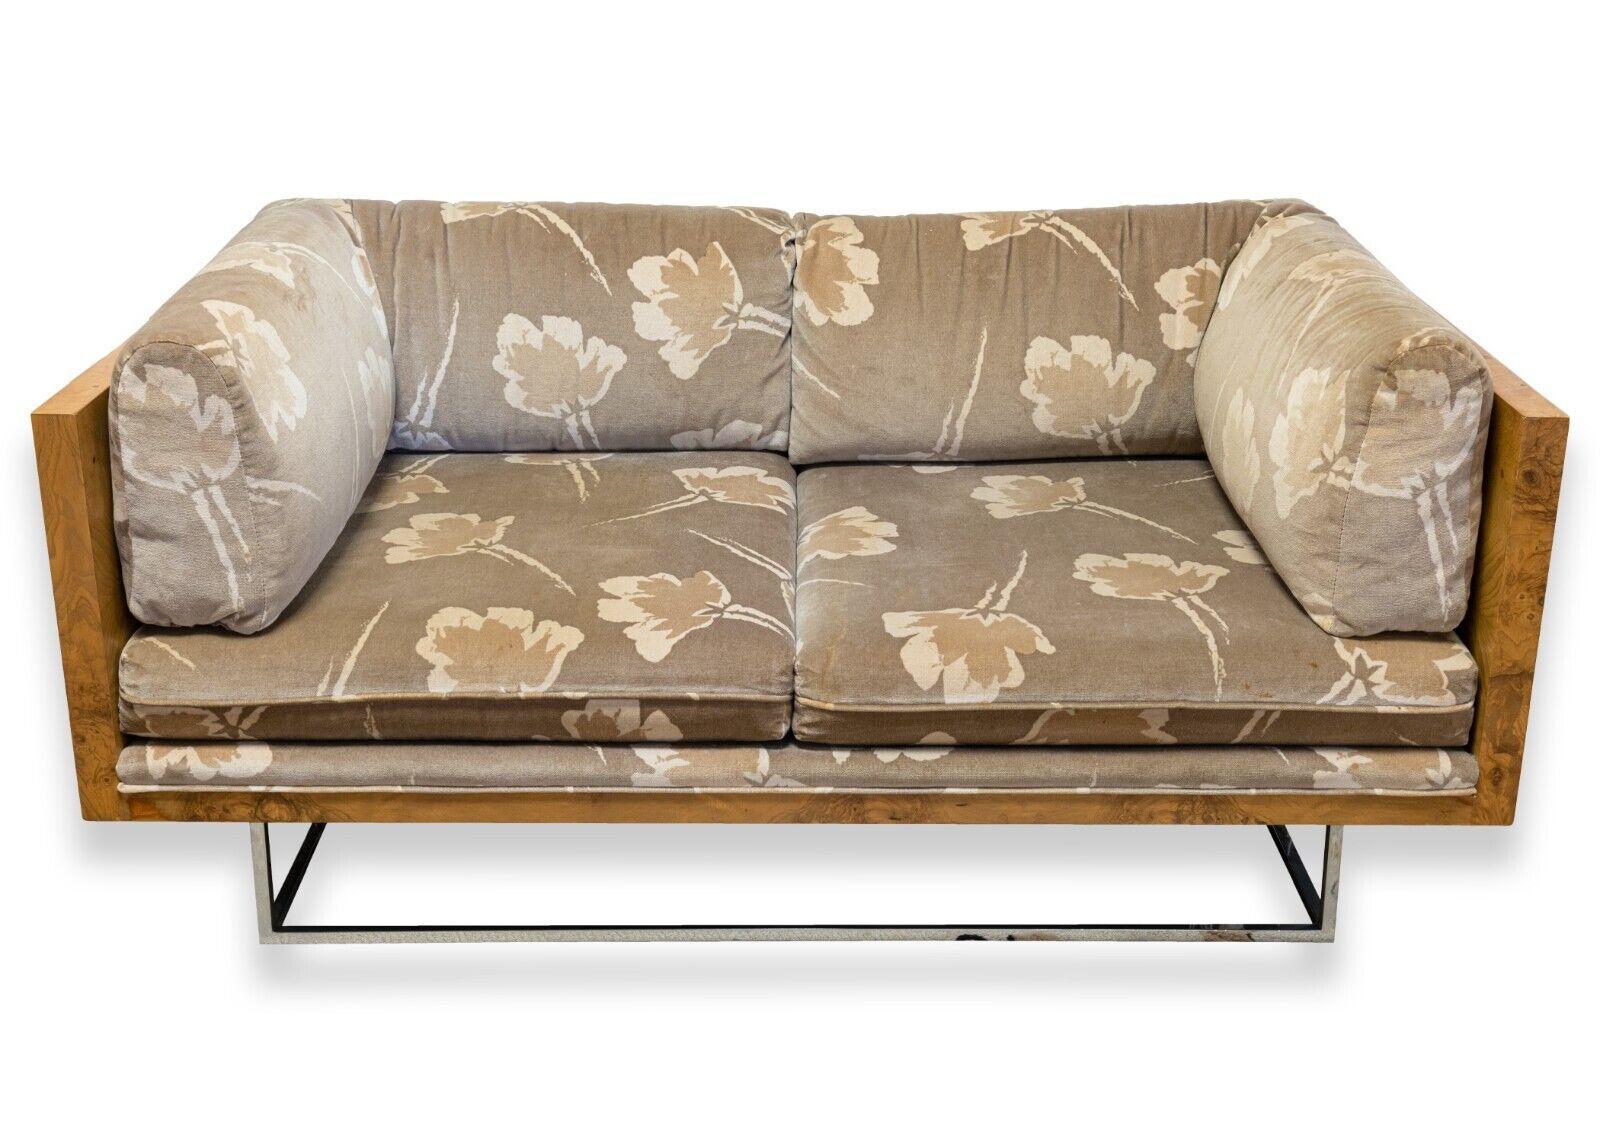 A Milo Baughman burlwood & chrome loveseat. This absolutely stunning loveseat is a mid century modern gem. This piece features some fantastic design from Milo Baughman. The details include the chrome base legs leading up to the burlwood sides and